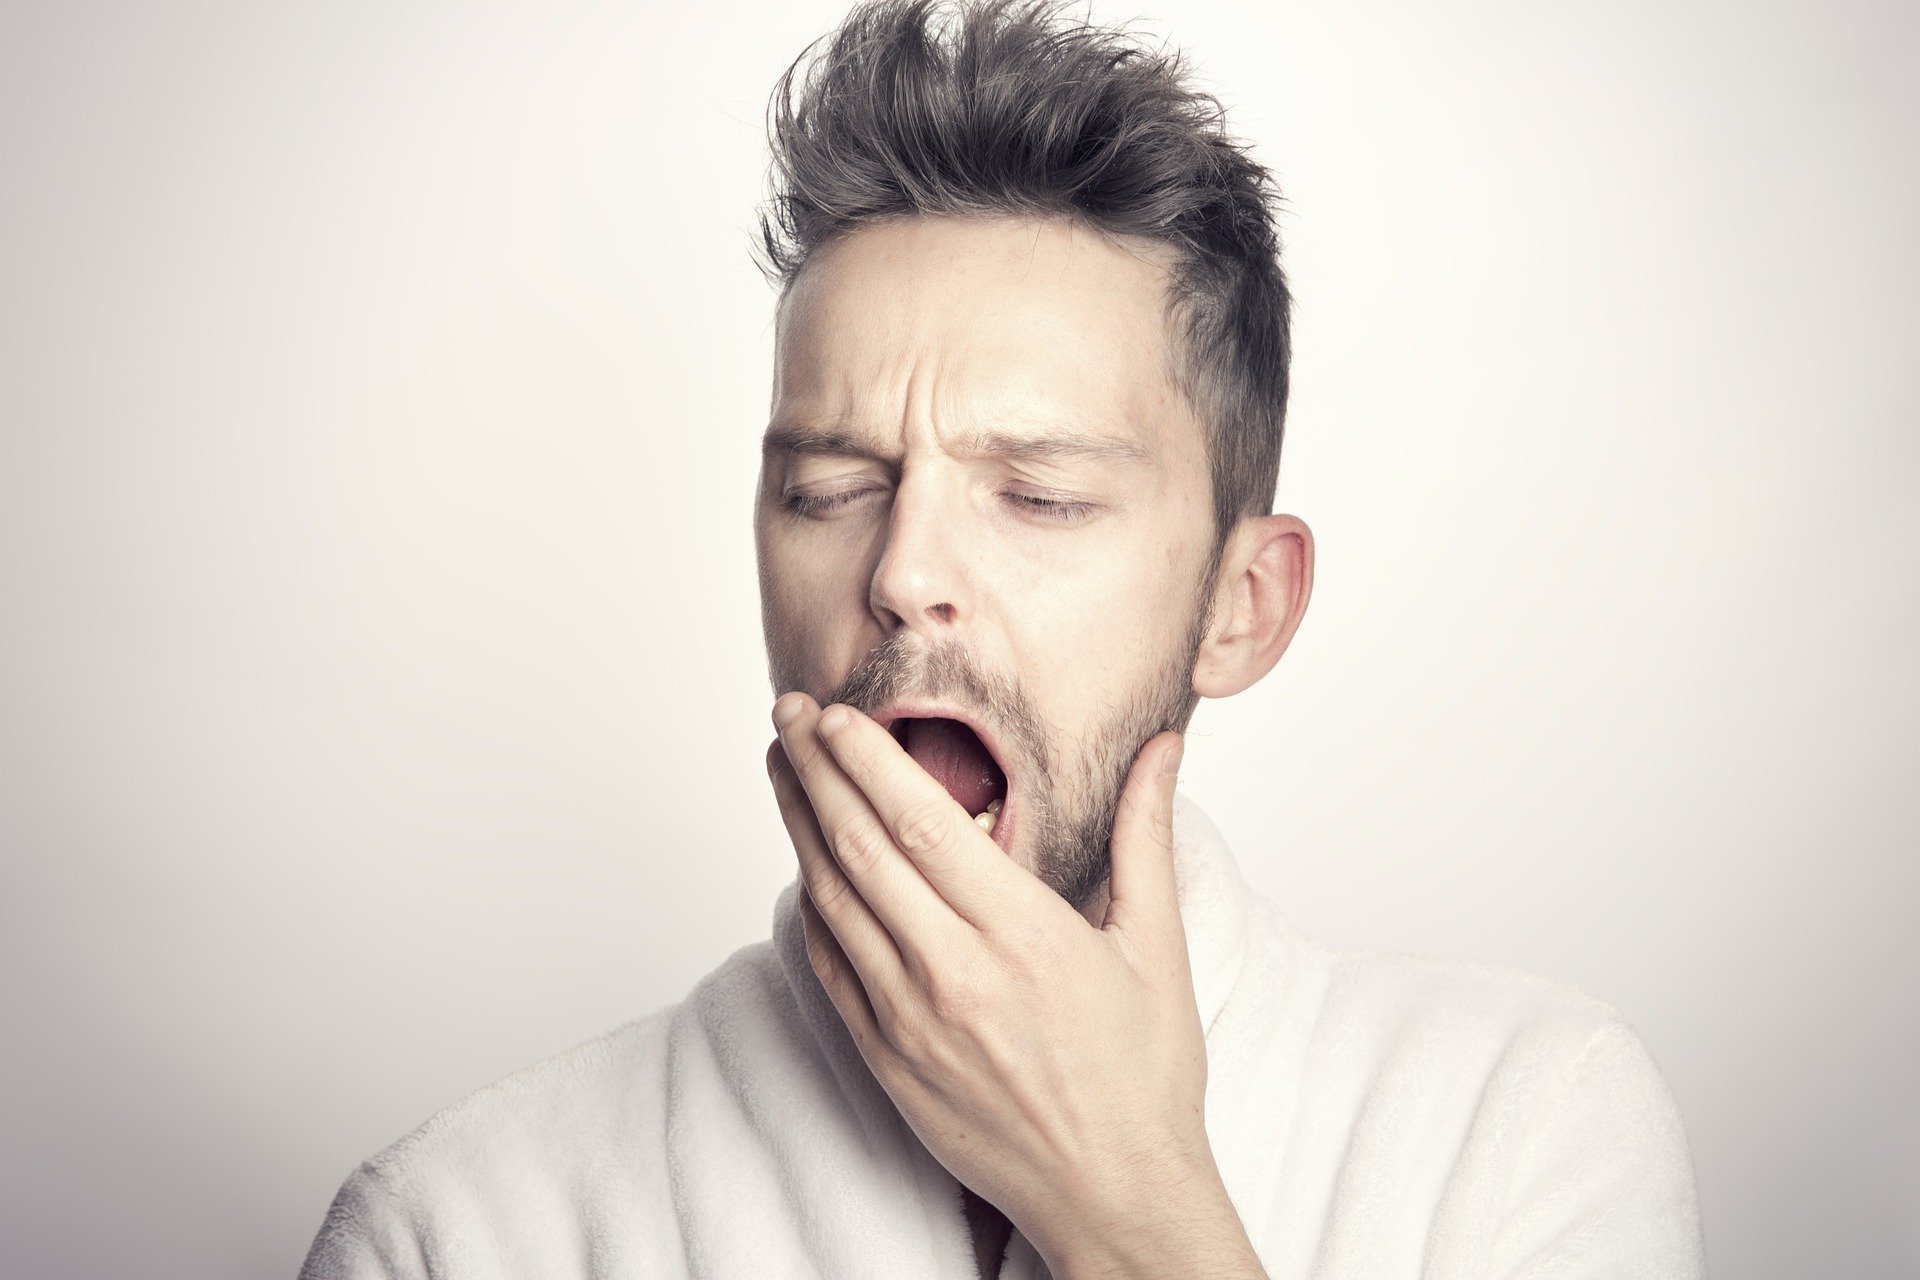 A man covering his mouth while yawning | Photo: Pixabay/Sammy-Williams